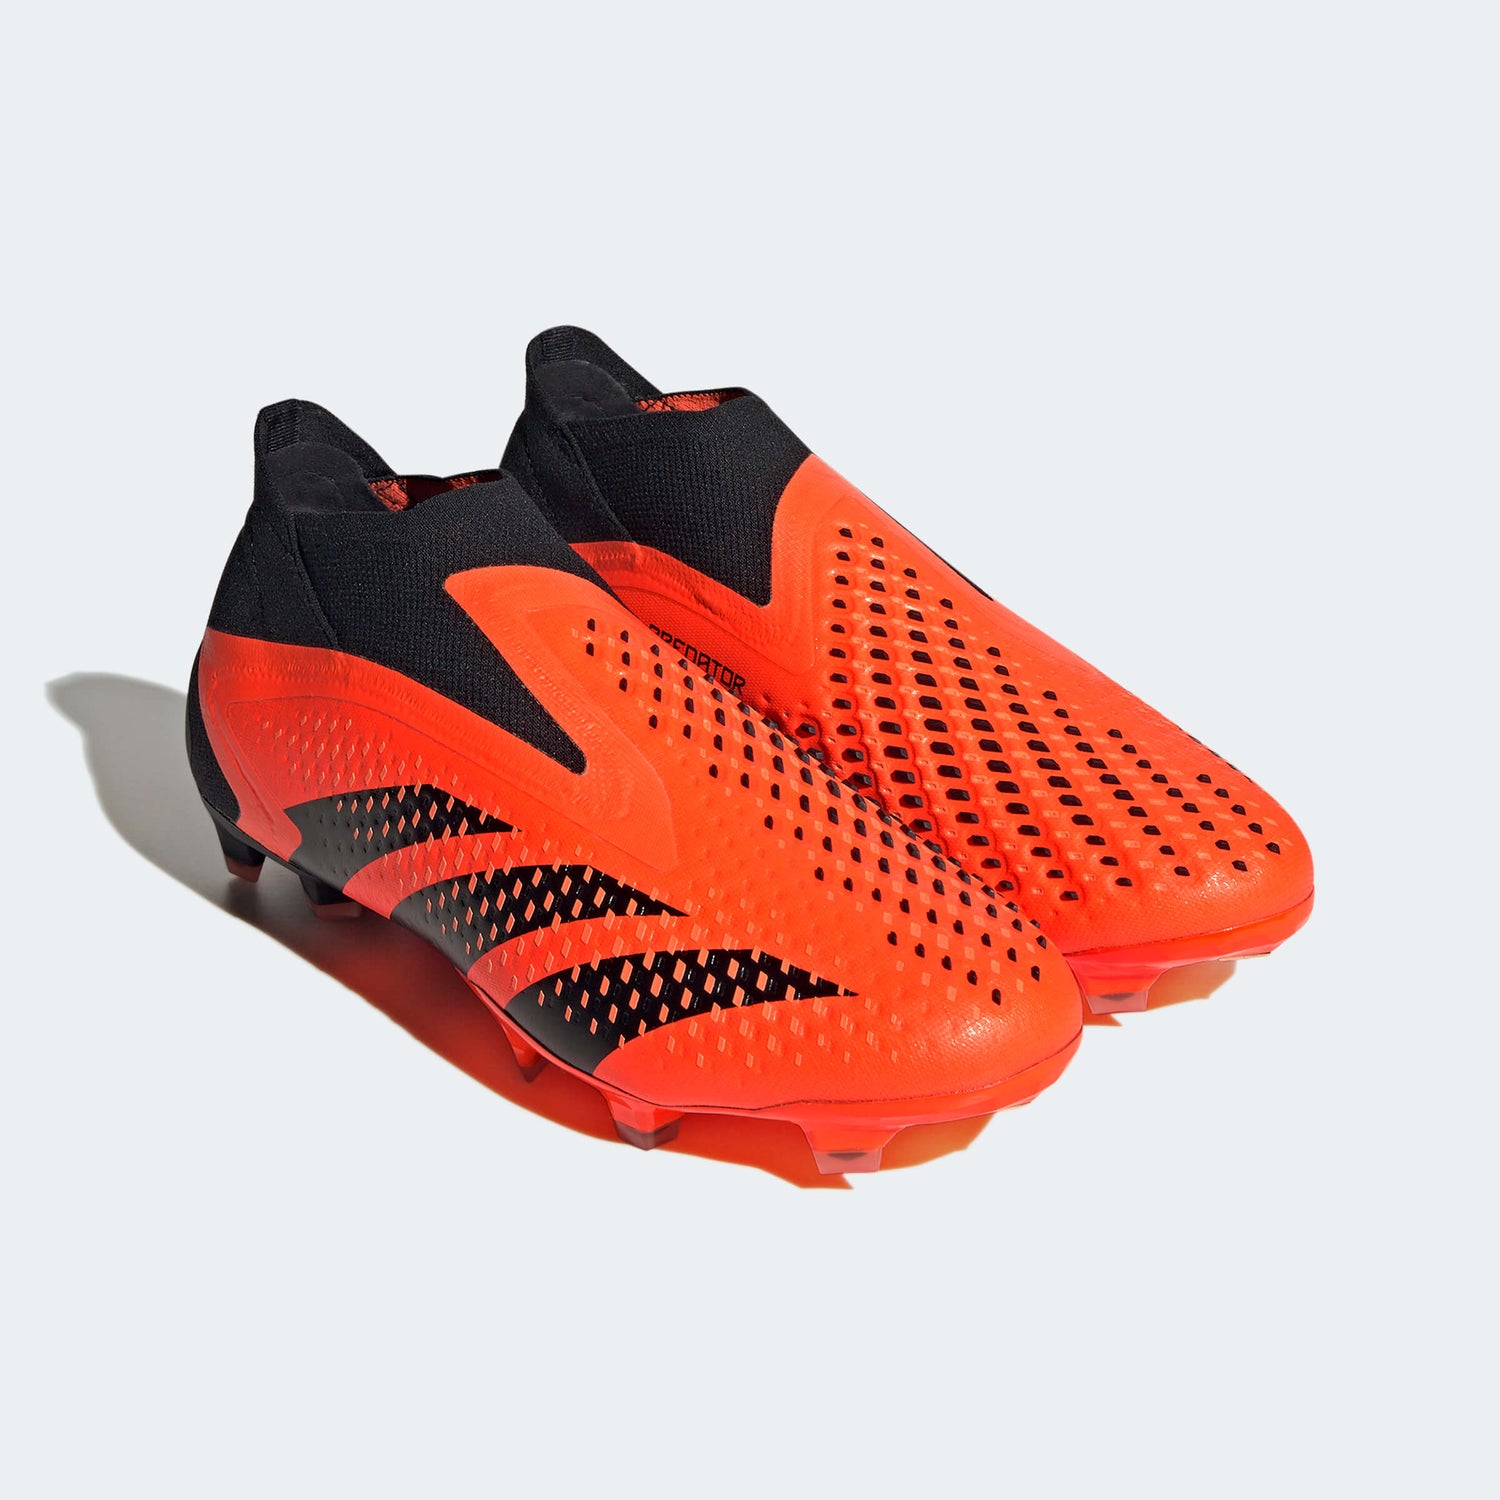 adidas Accuracy+ FG - Heatspawn Pack (SP23) (Pair - Front Lateral)